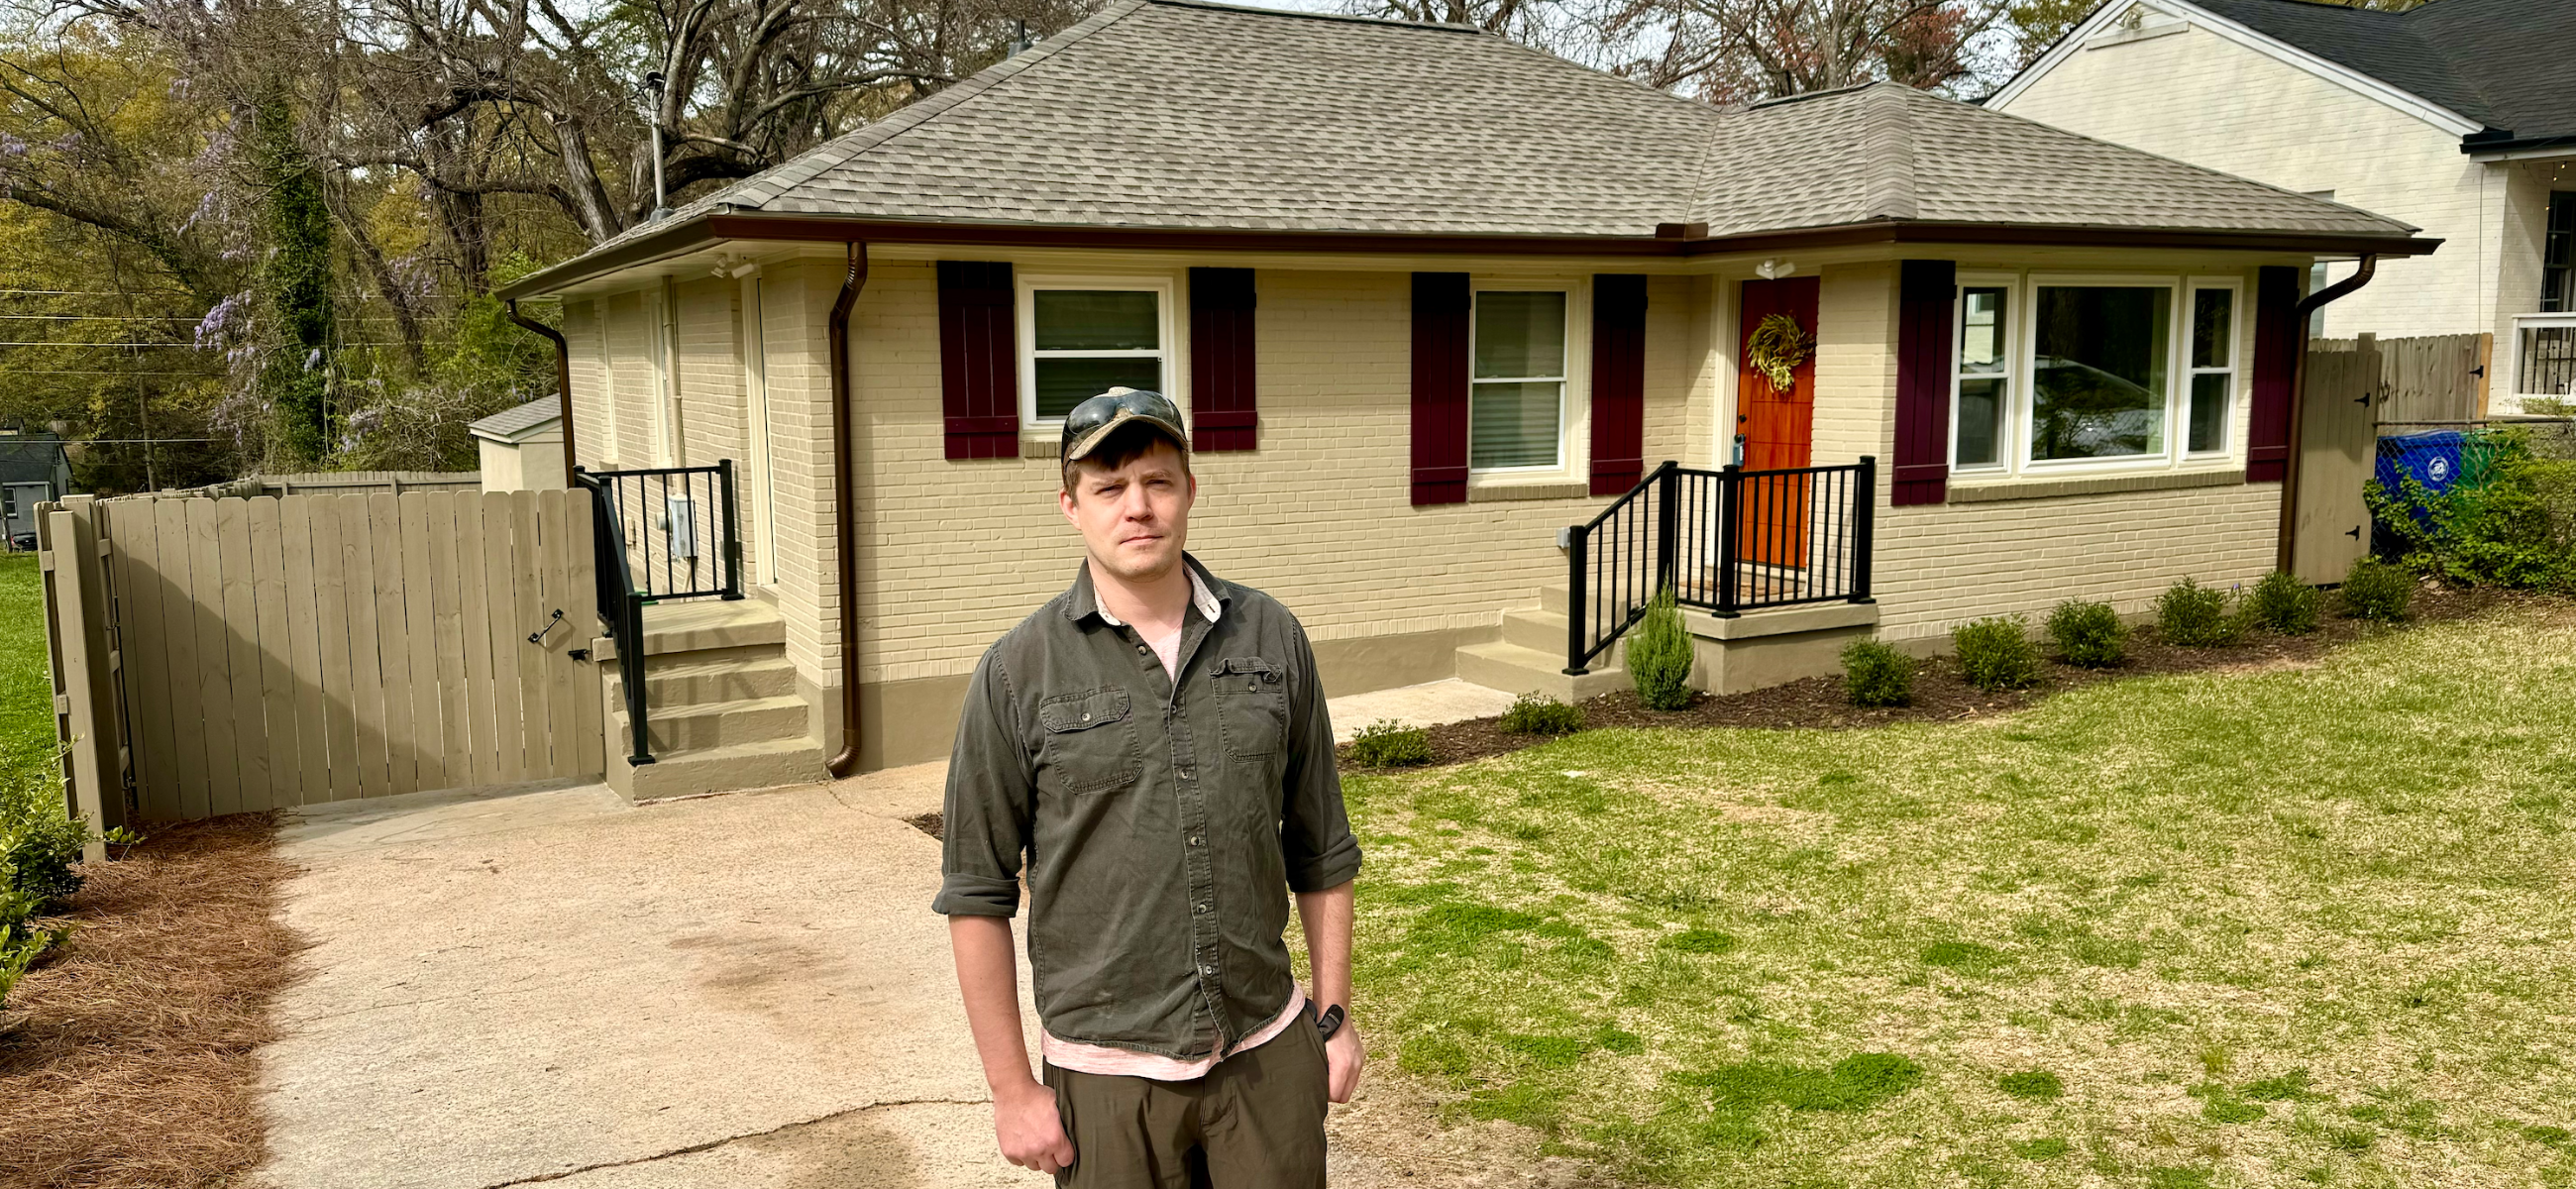 Tim Arko stands in front of the property he formerly owned in south Dekalb County where trespassers stayed for seven months in 2023 while he pursued legal remedies to get them evicted. Arko said he lost about $100,000 in unpaid rent, attorneys fees and diminished resale value of his home, which was damaged by the squatters. It has since been sold, repaired and renovated. (Credit: Jill Jordan Sieder)